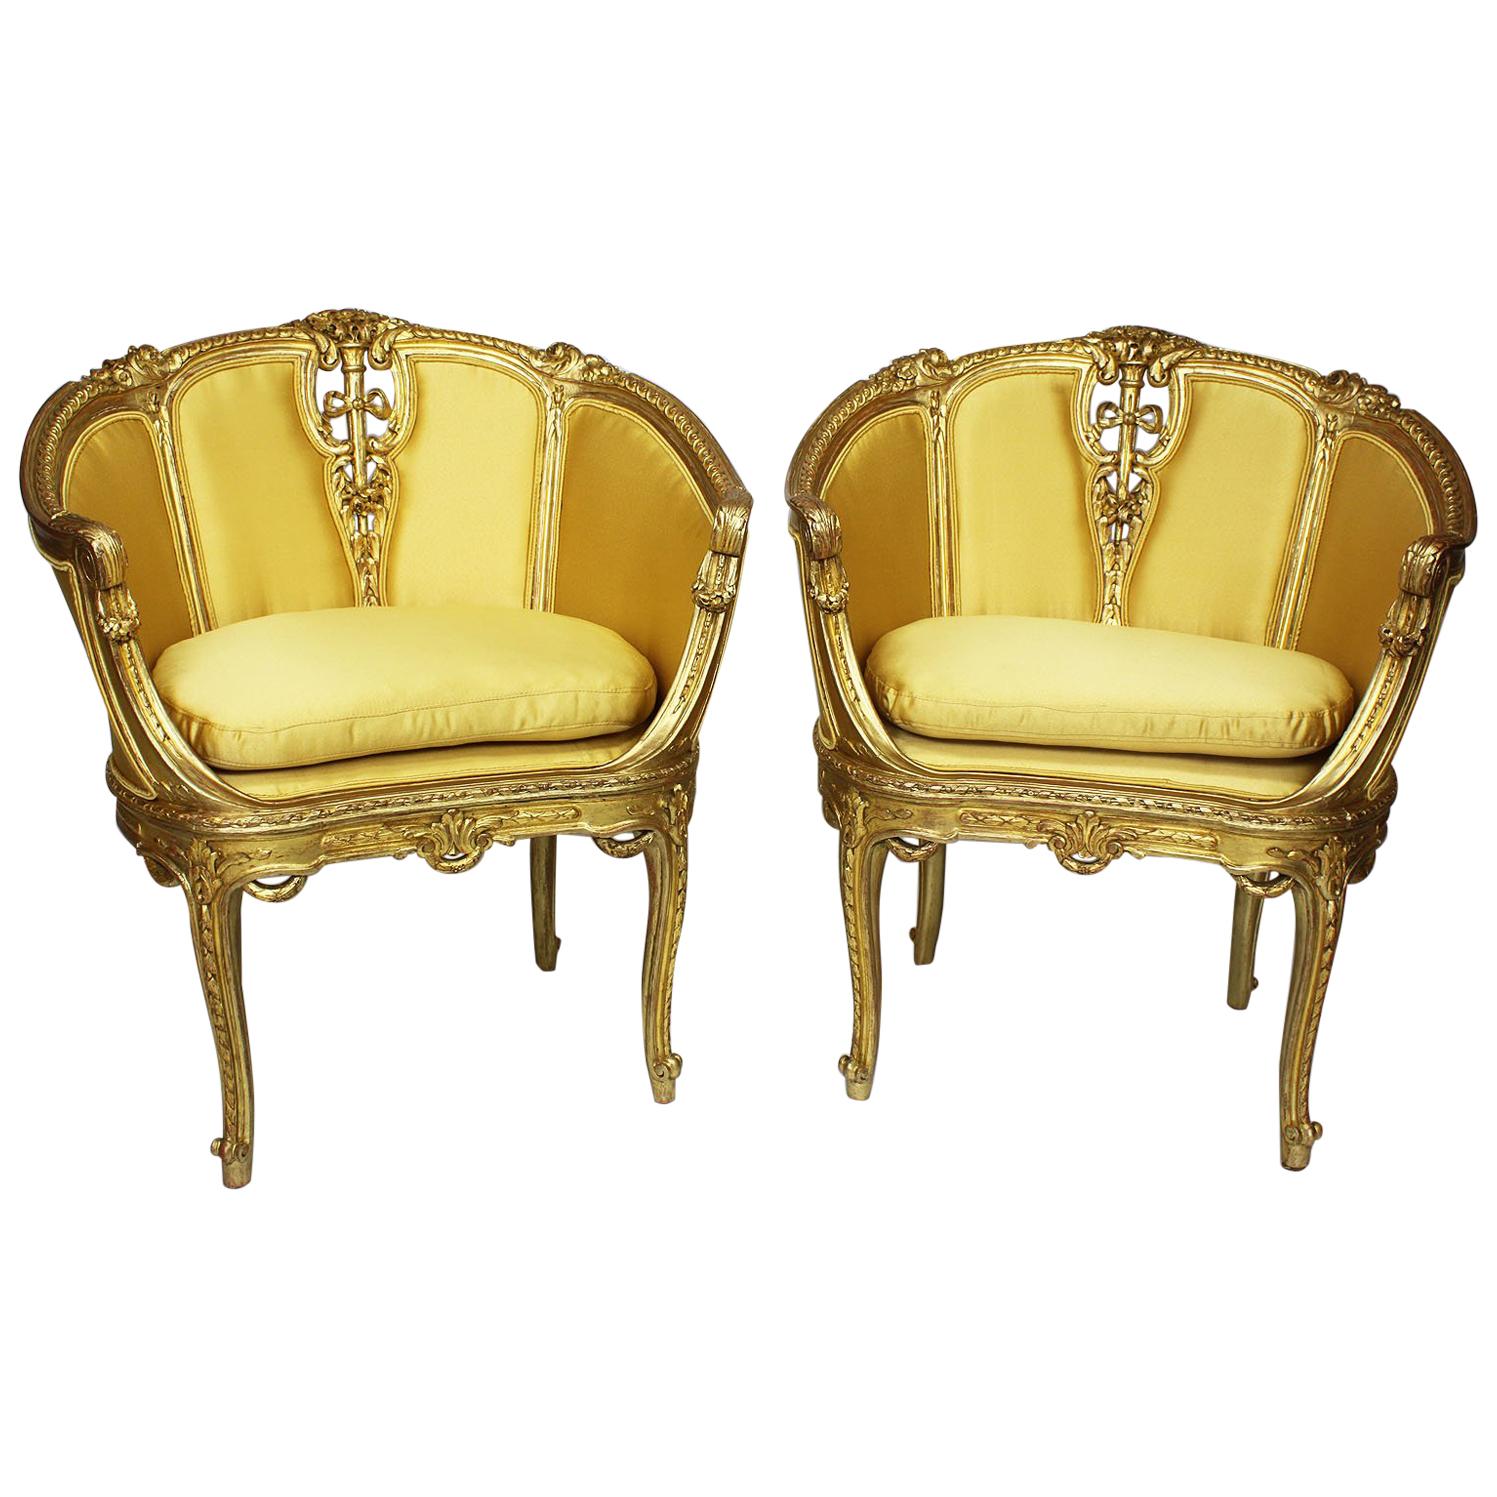 Pair of French Belle Époque Louis XV Style GiltWood Carved Bergère Armchairs